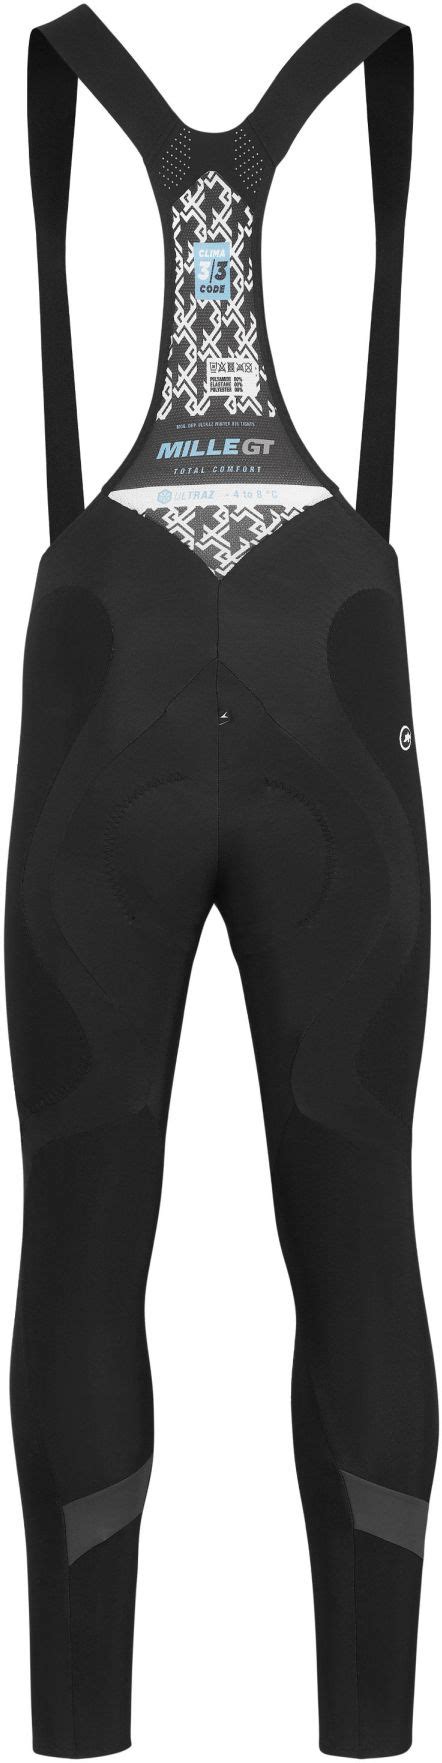 Assos Mille Gt Ultraz Winter Bib Tights Tights Cycle Superstore